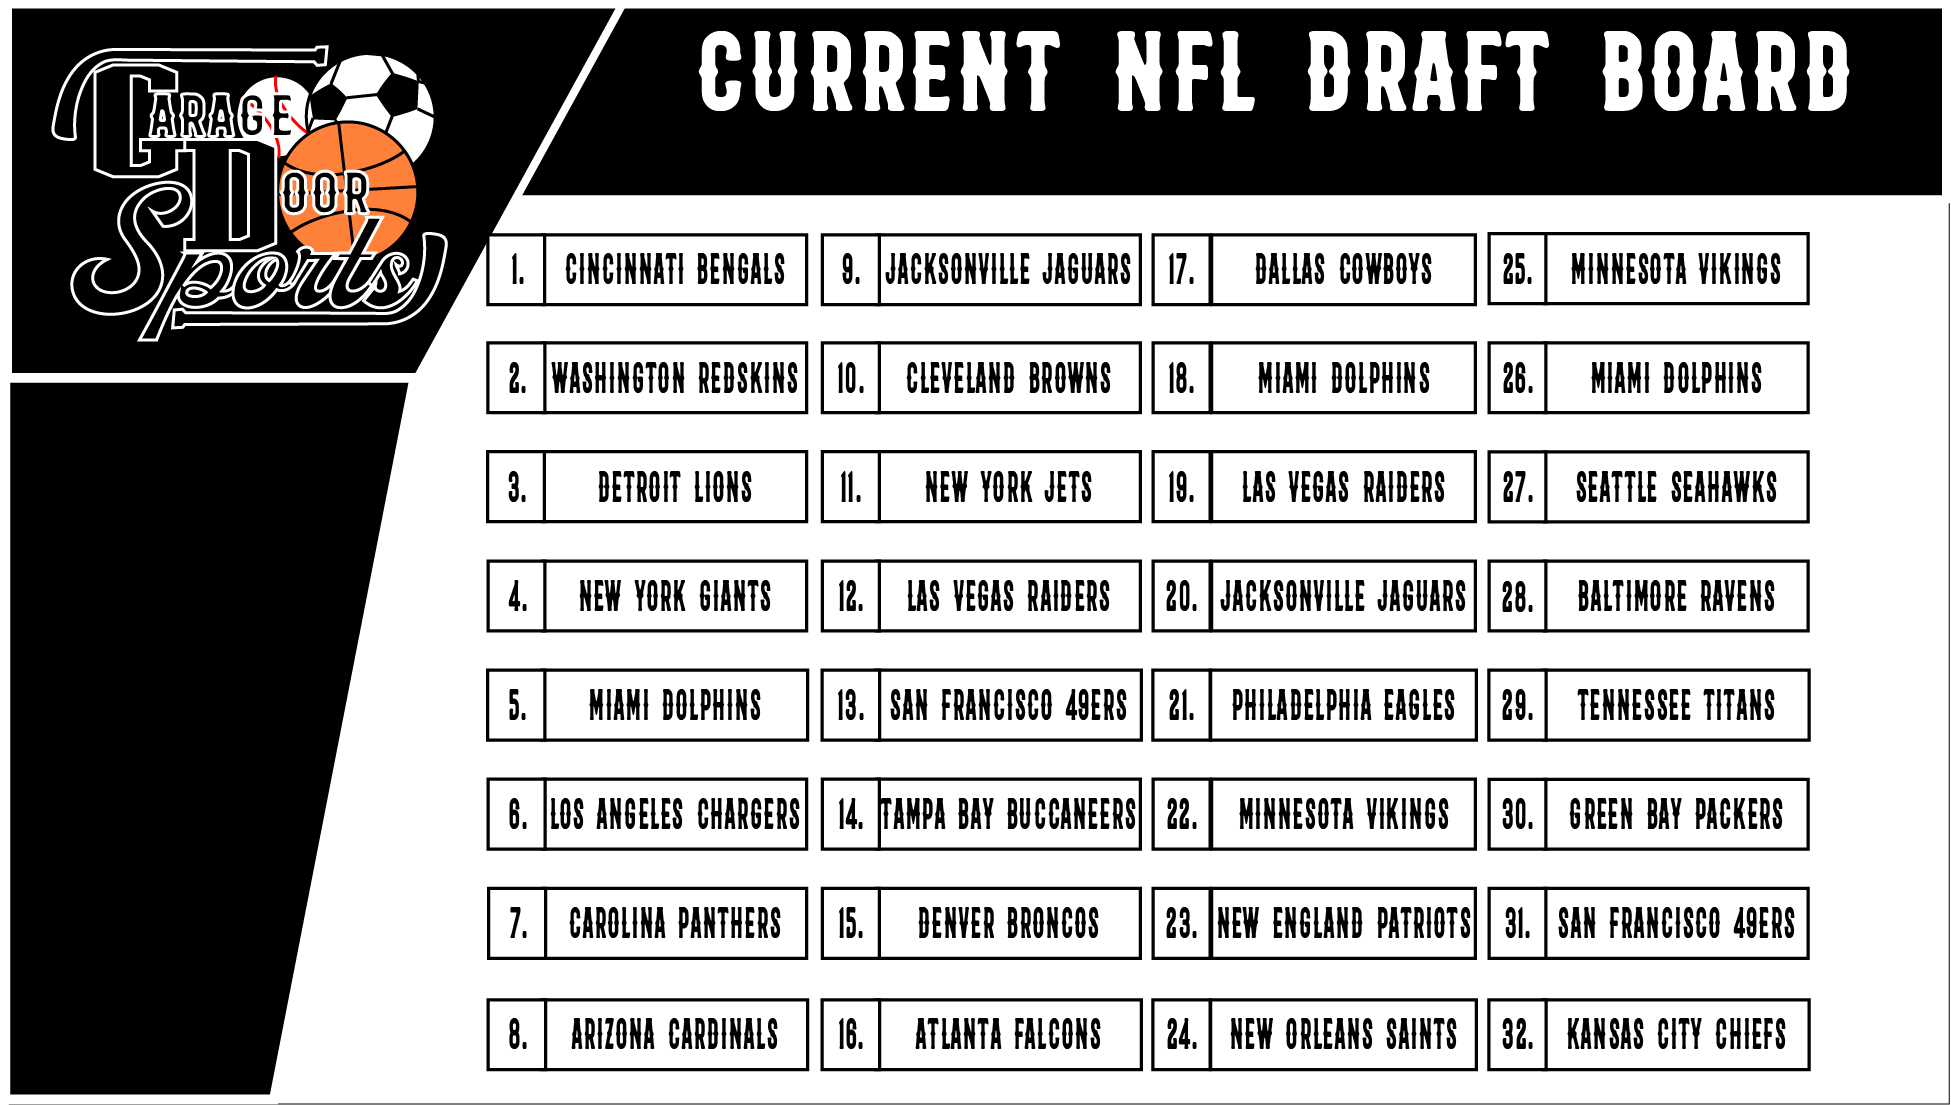 The current NFL Draft board prior to the 2020 NFL Draft.